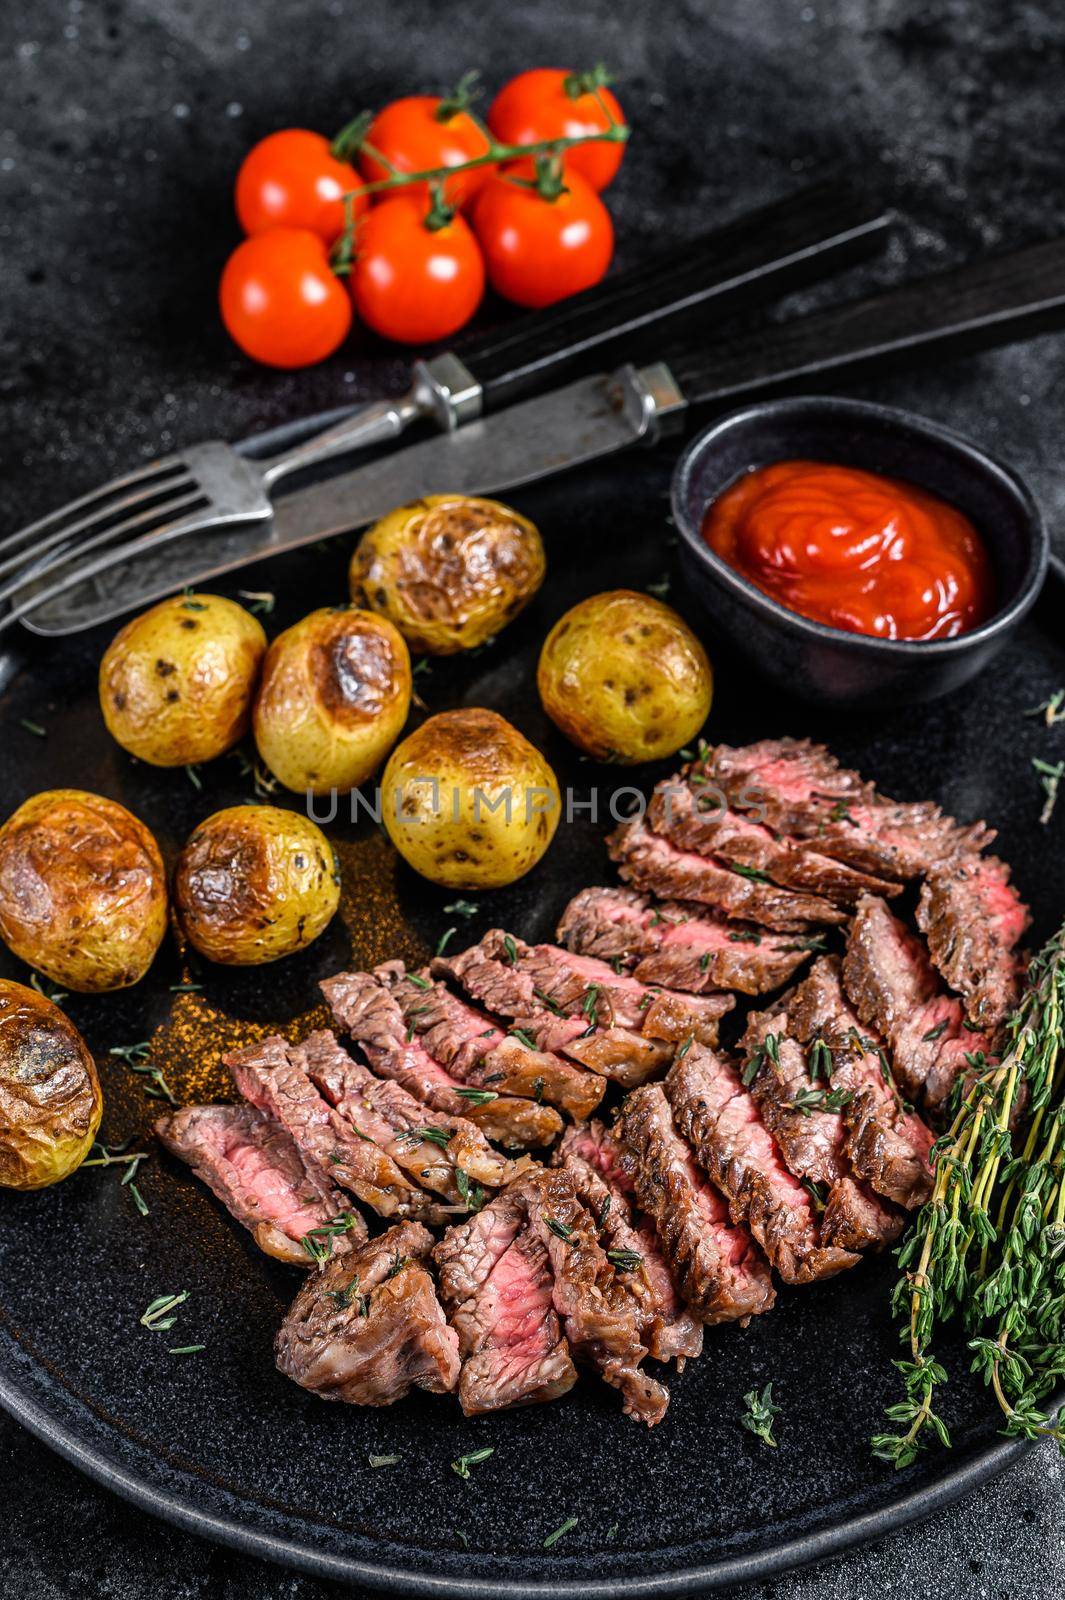 Grilled marble meat beef Steak with fried potato. Black background. Top view.